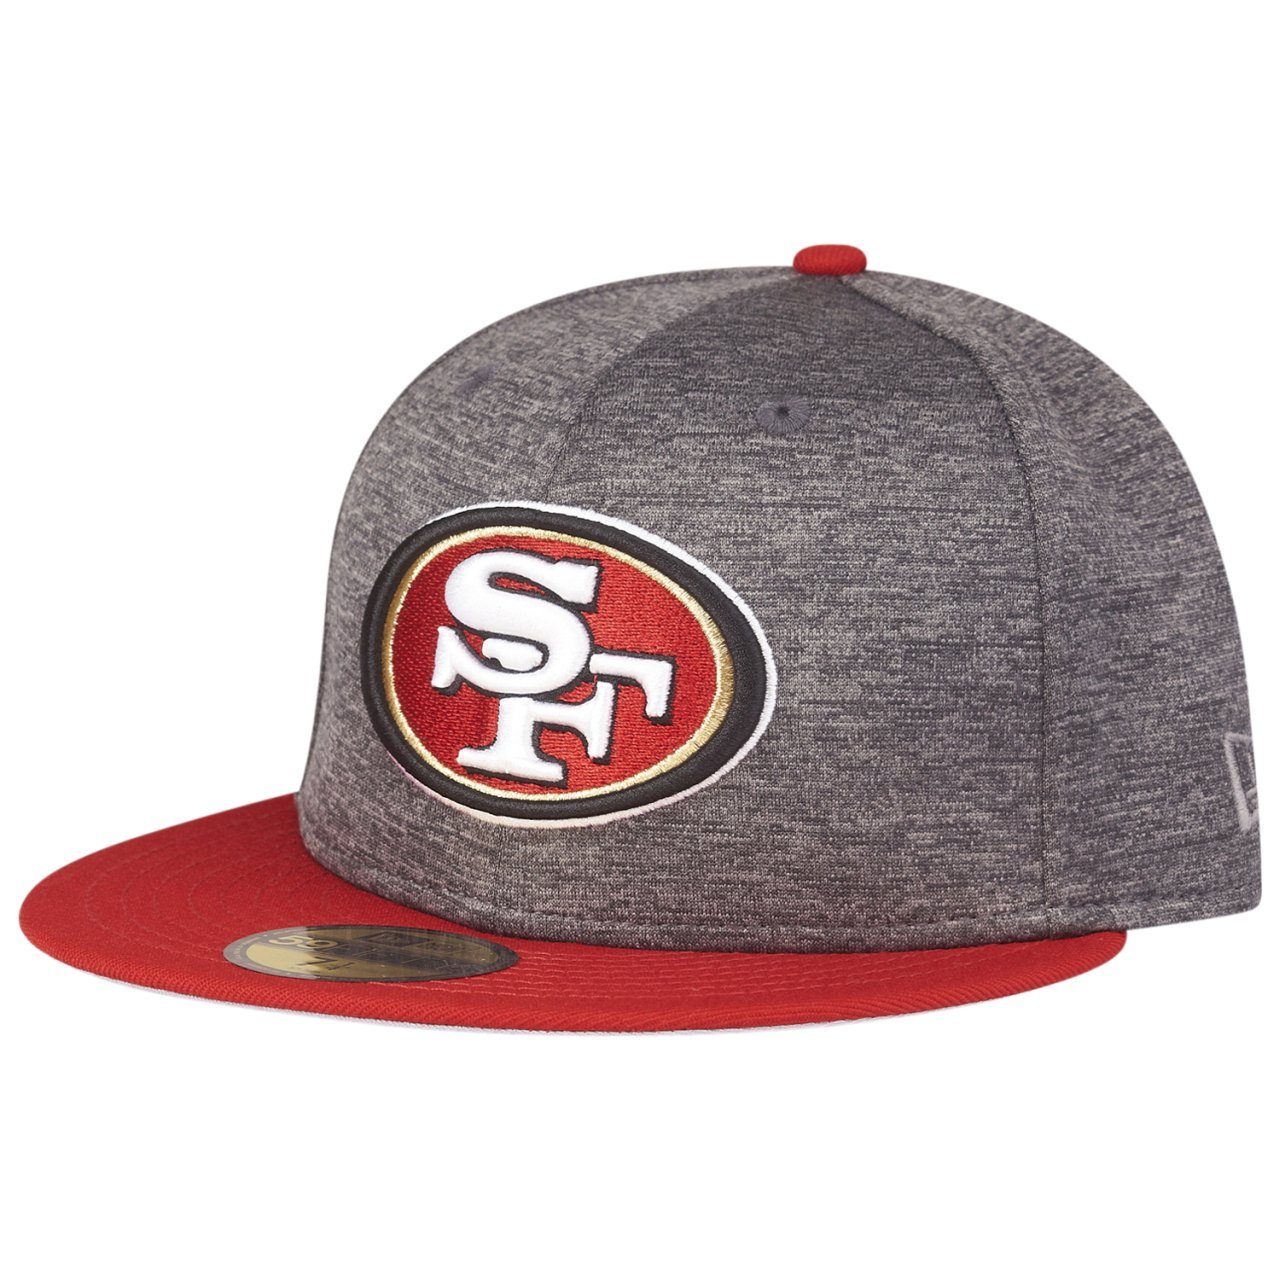 New Era Fitted Cap 59Fifty SHADOW TECH San Francisco 49ers